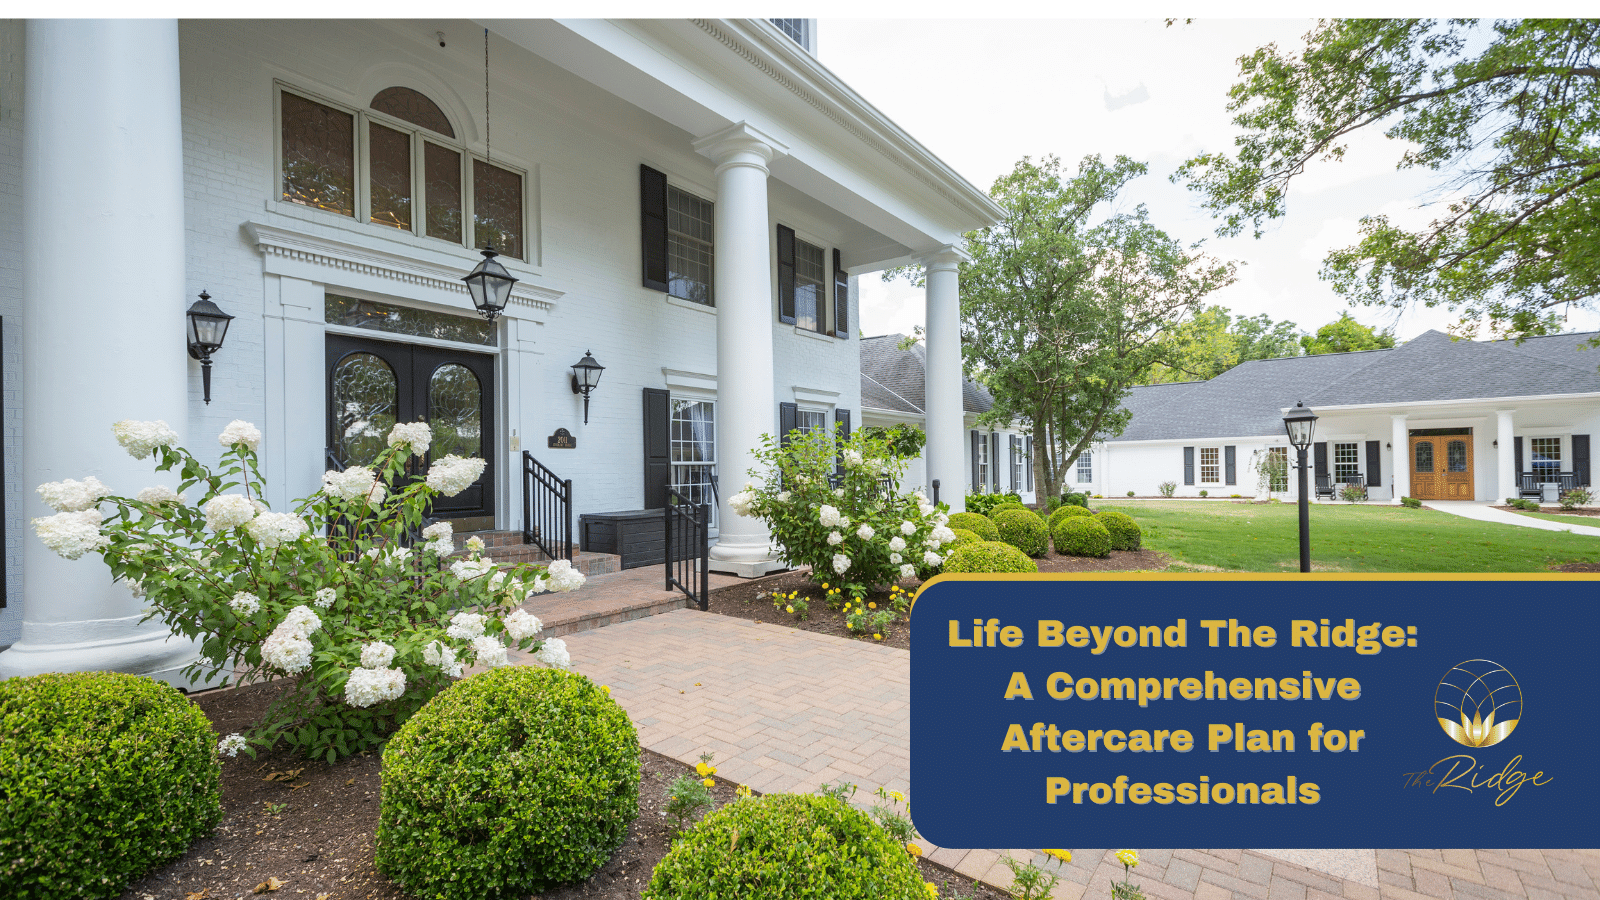 Life Beyond The Ridge: A Comprehensive Aftercare Plan for Professionals